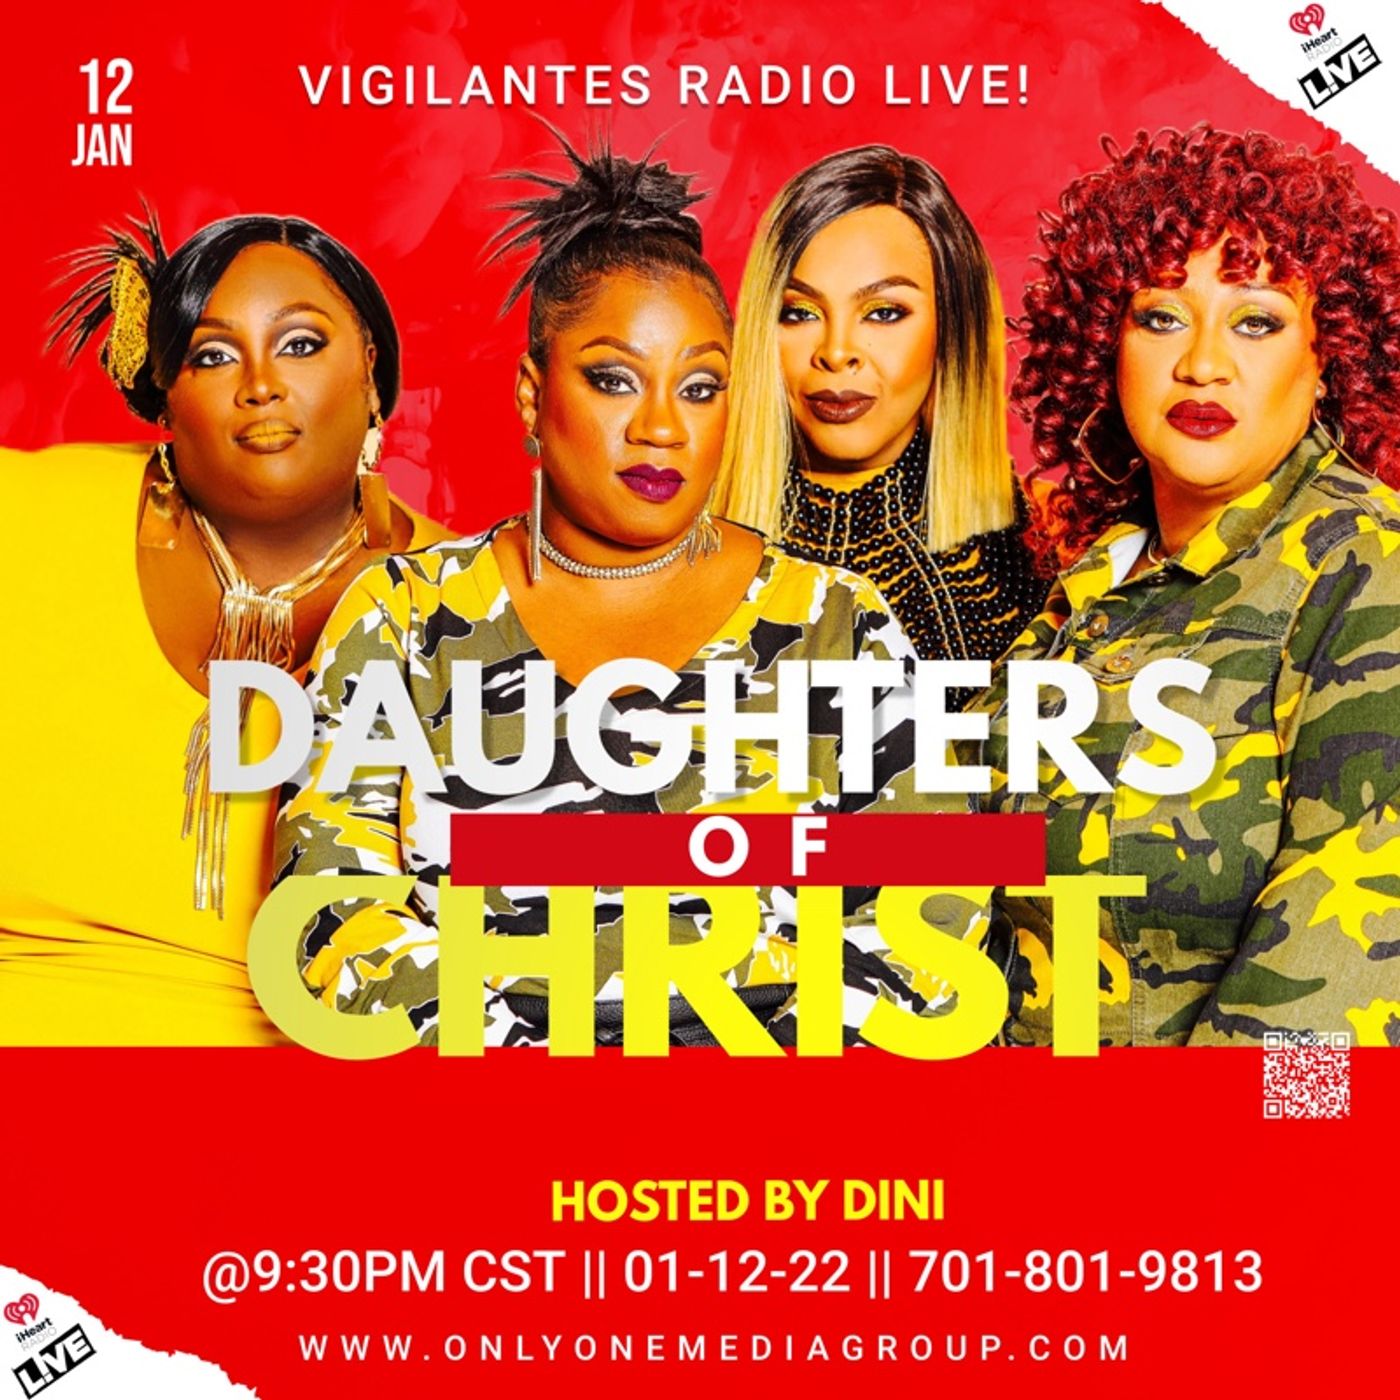 The Daughters of Christ Interview. Image